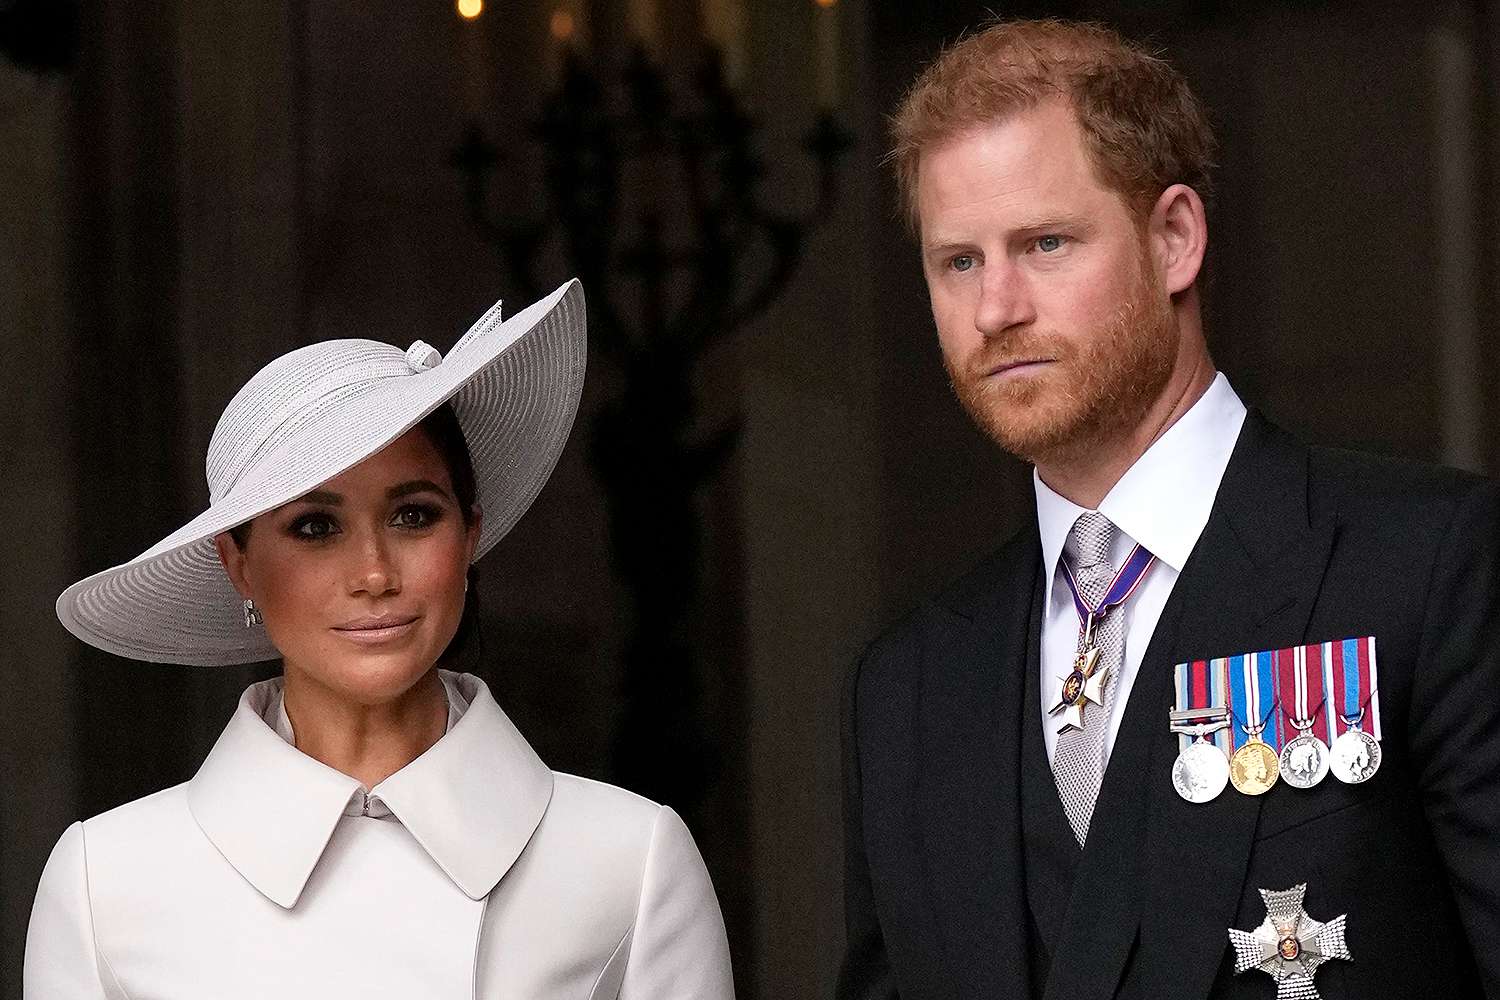 Meghan Markle wearing a white coat and hat and Prince Harry wearing a black suit with medals